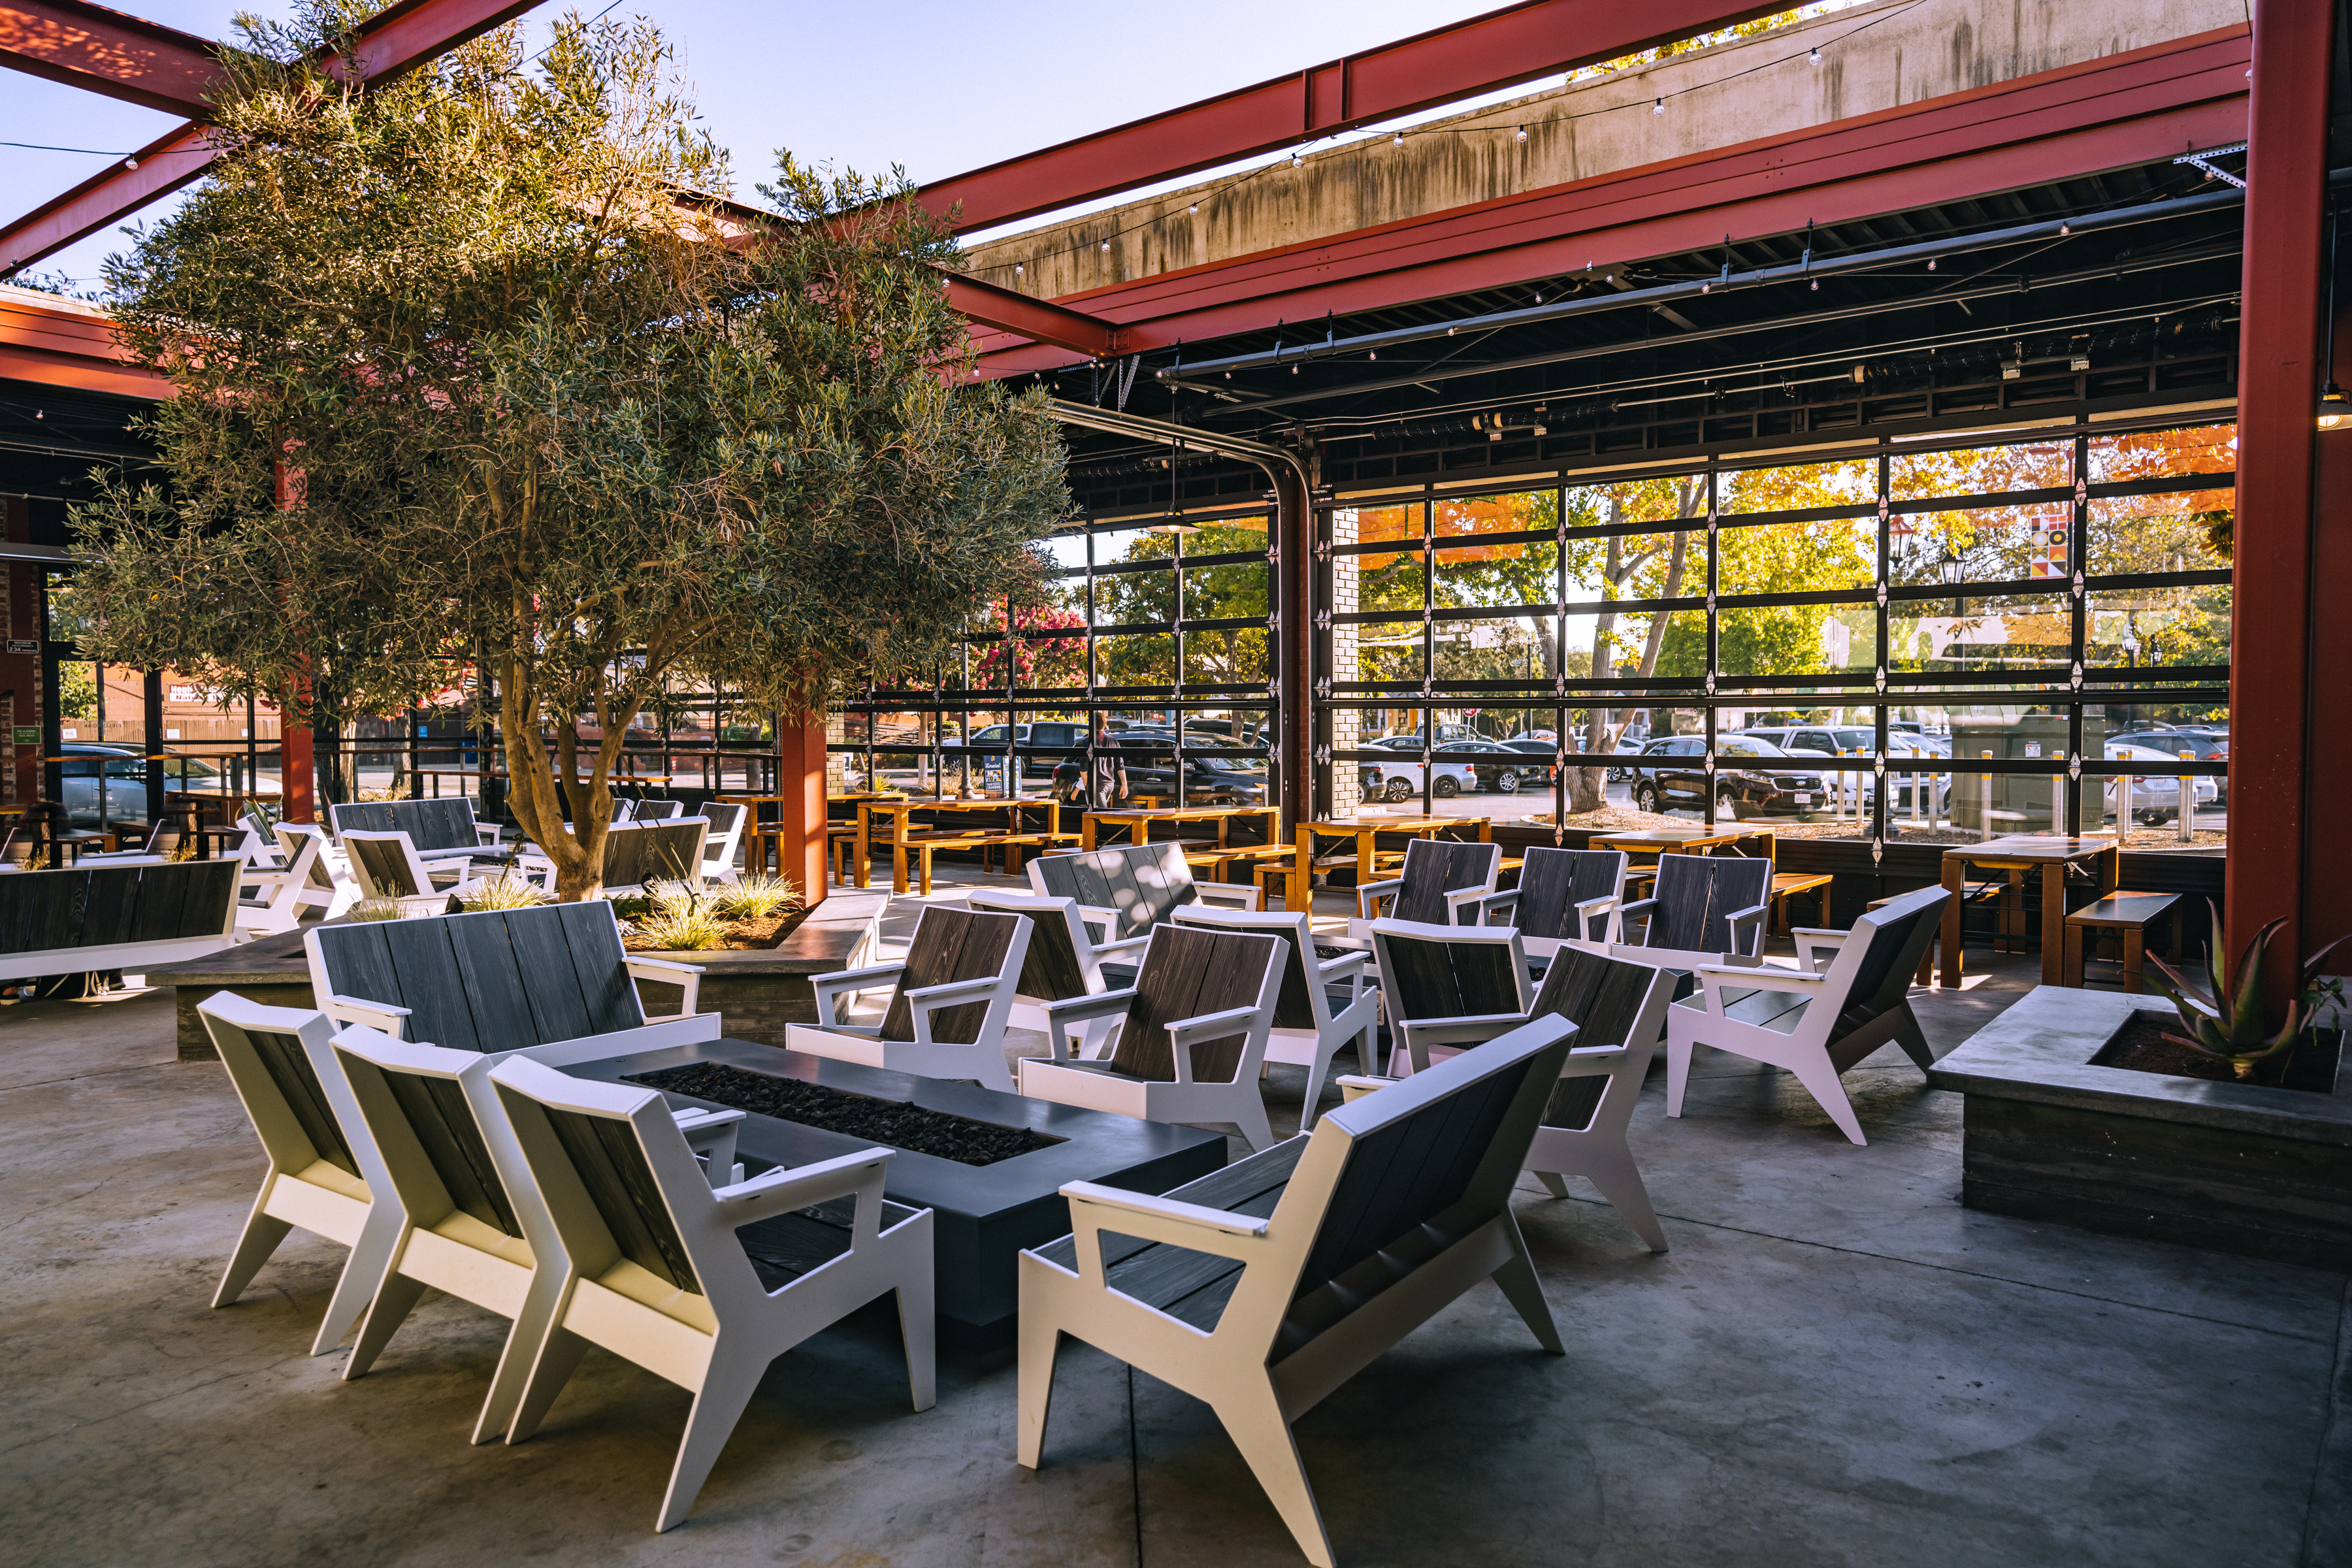 Fieldwork Brewing’s newest location reimagines a former 1960s Firestone Auto Service Center into a 7,800-square-foo beer garden at 100 West Juana Avenue in San Leandro.